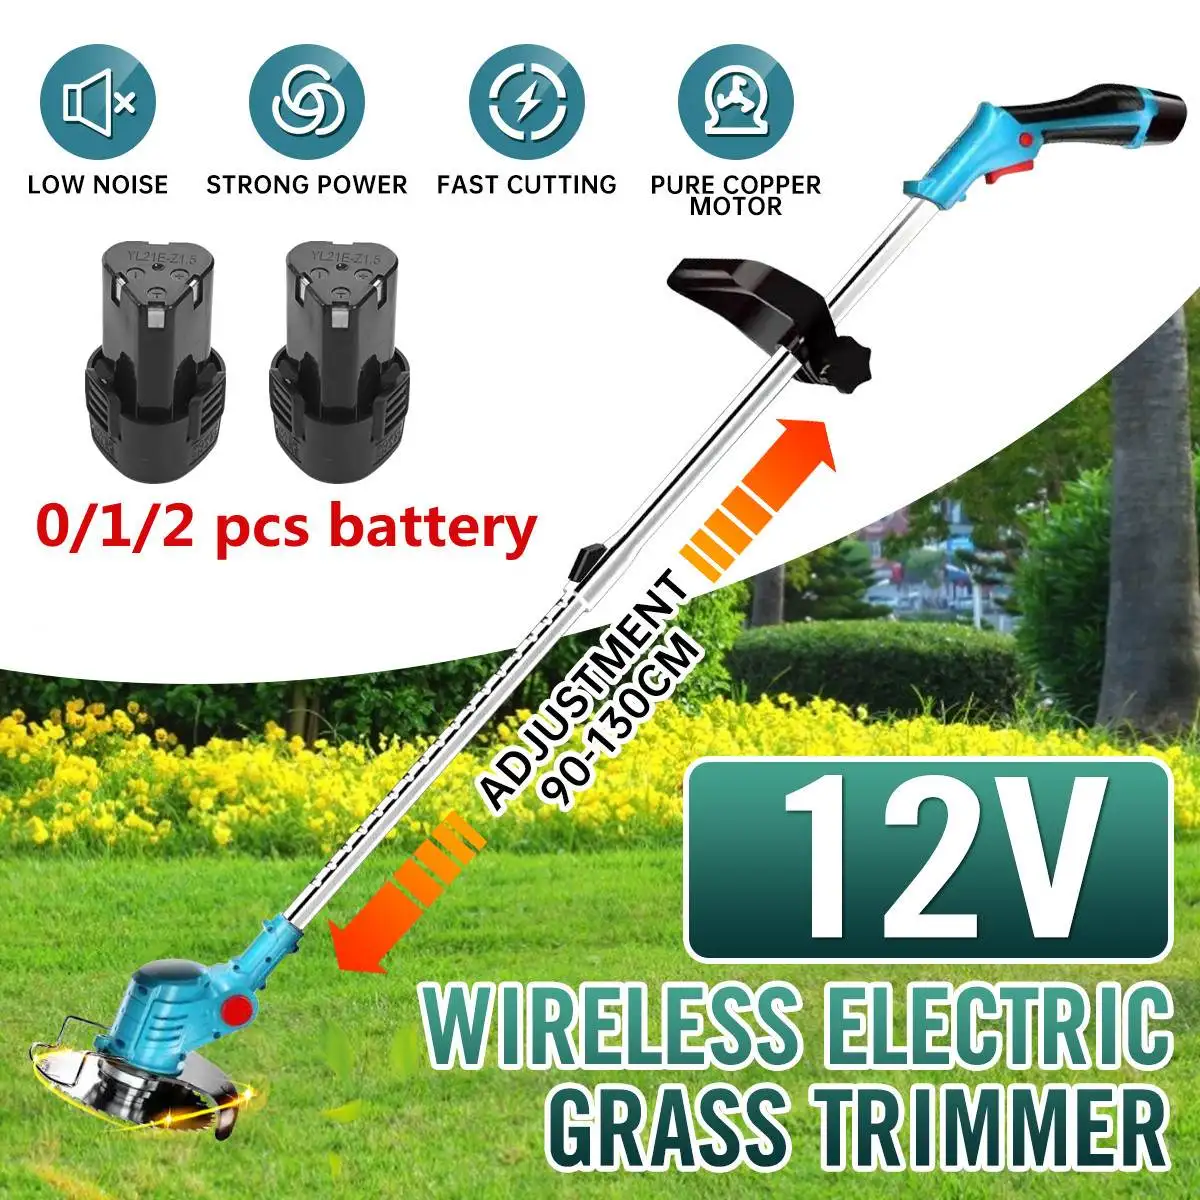 Drillpro 12V Cordless Electric Grass Trimmer 450W Cordless Lawn Mower Set Adjustable Handheld Weeds Pruning Cutter Garden Tools